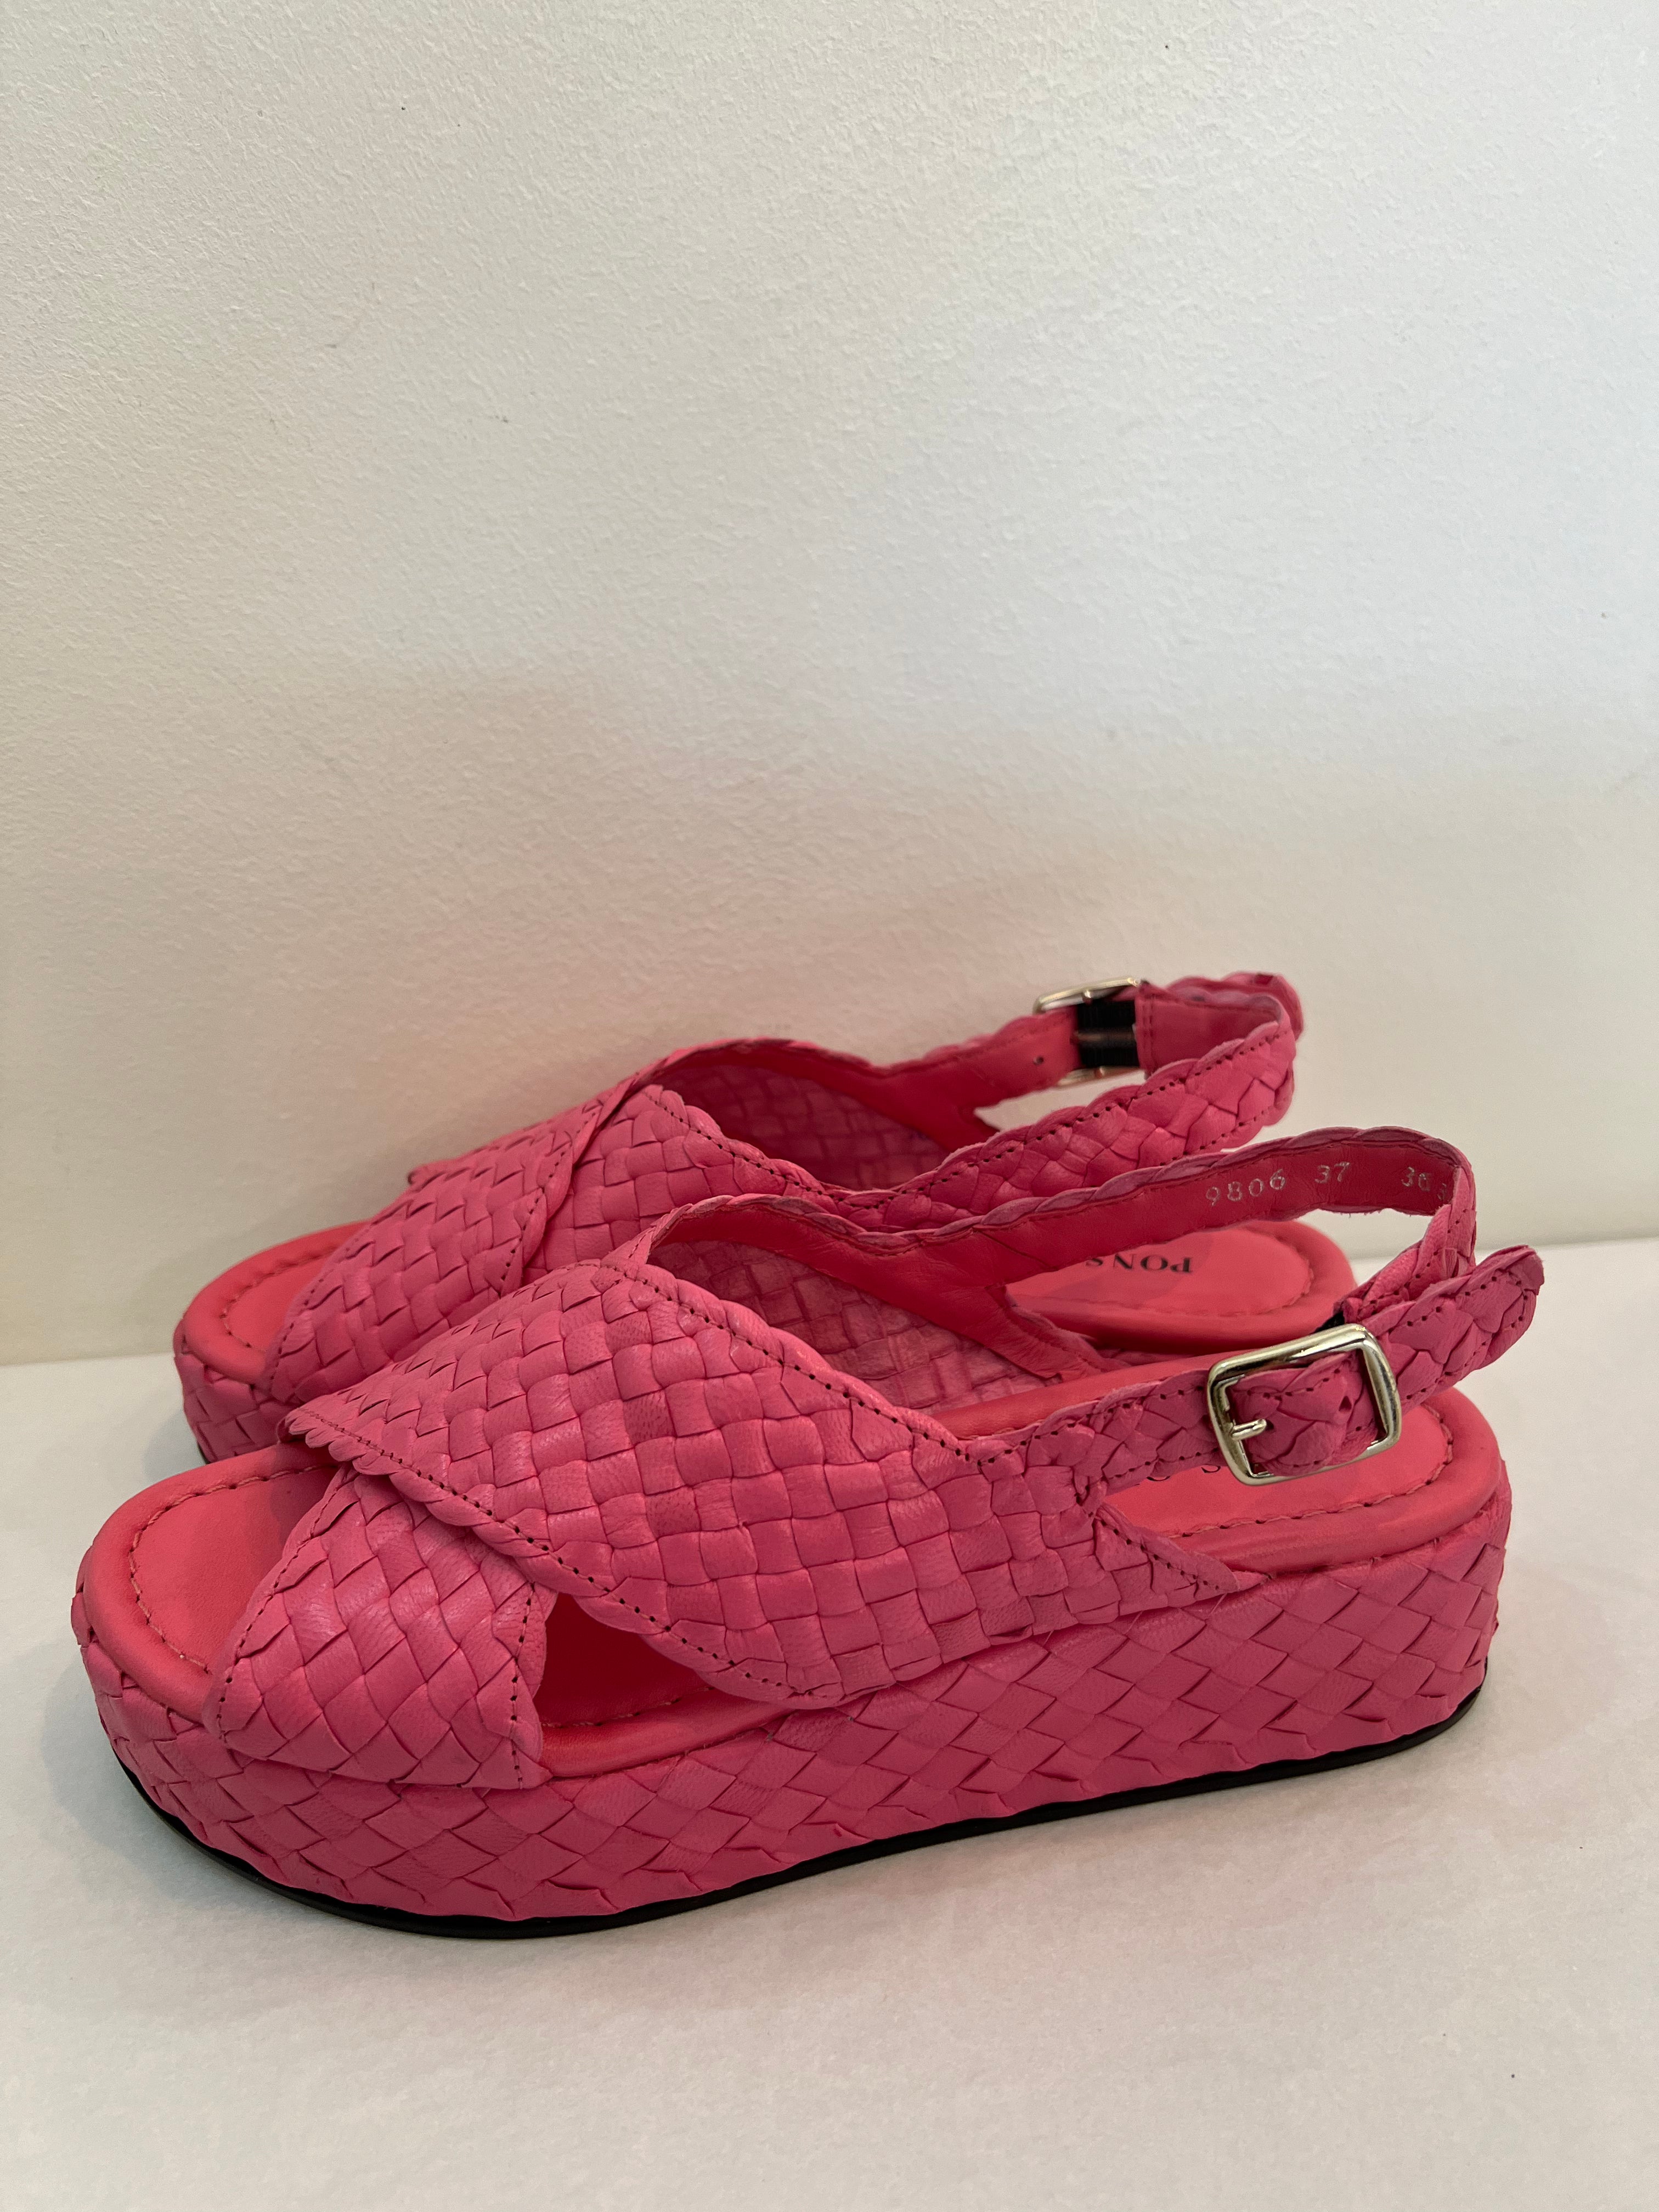 Hetre Alresford Hampshire Shoe Store Pons Quintana Pink Woven Wedge